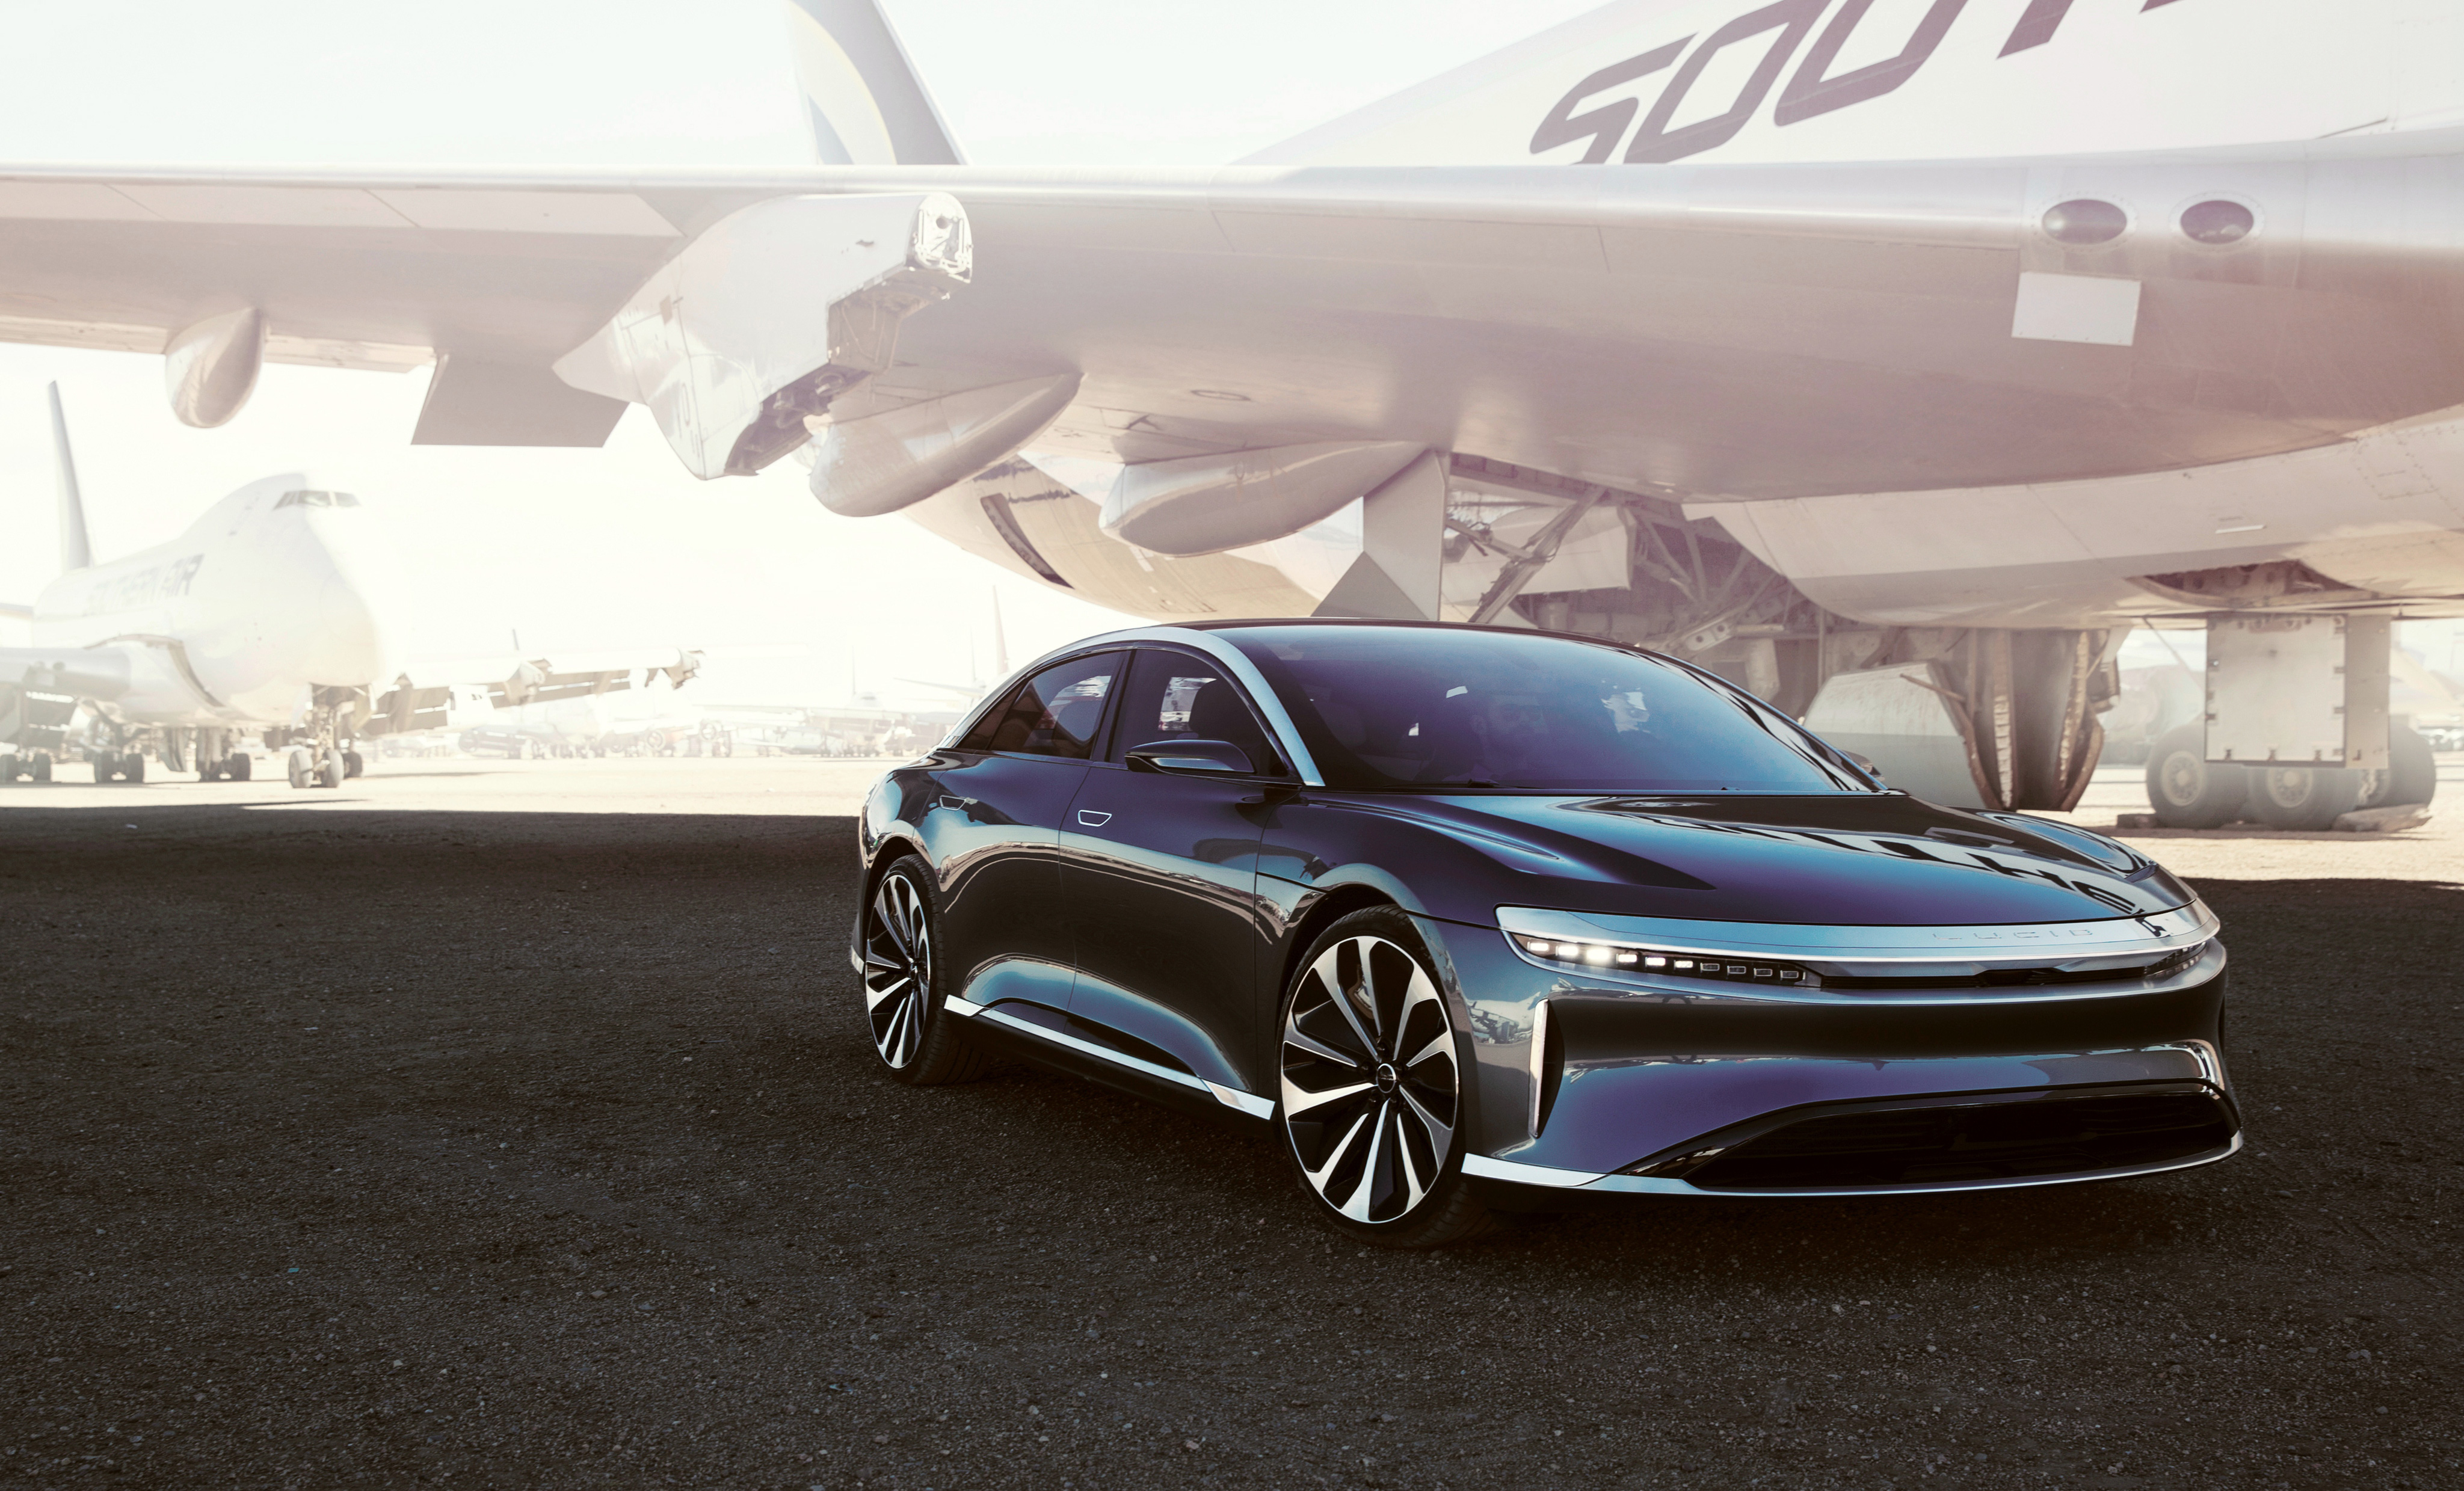 Lucid Air Launch Edition Prototype - Lucid Air , HD Wallpaper & Backgrounds